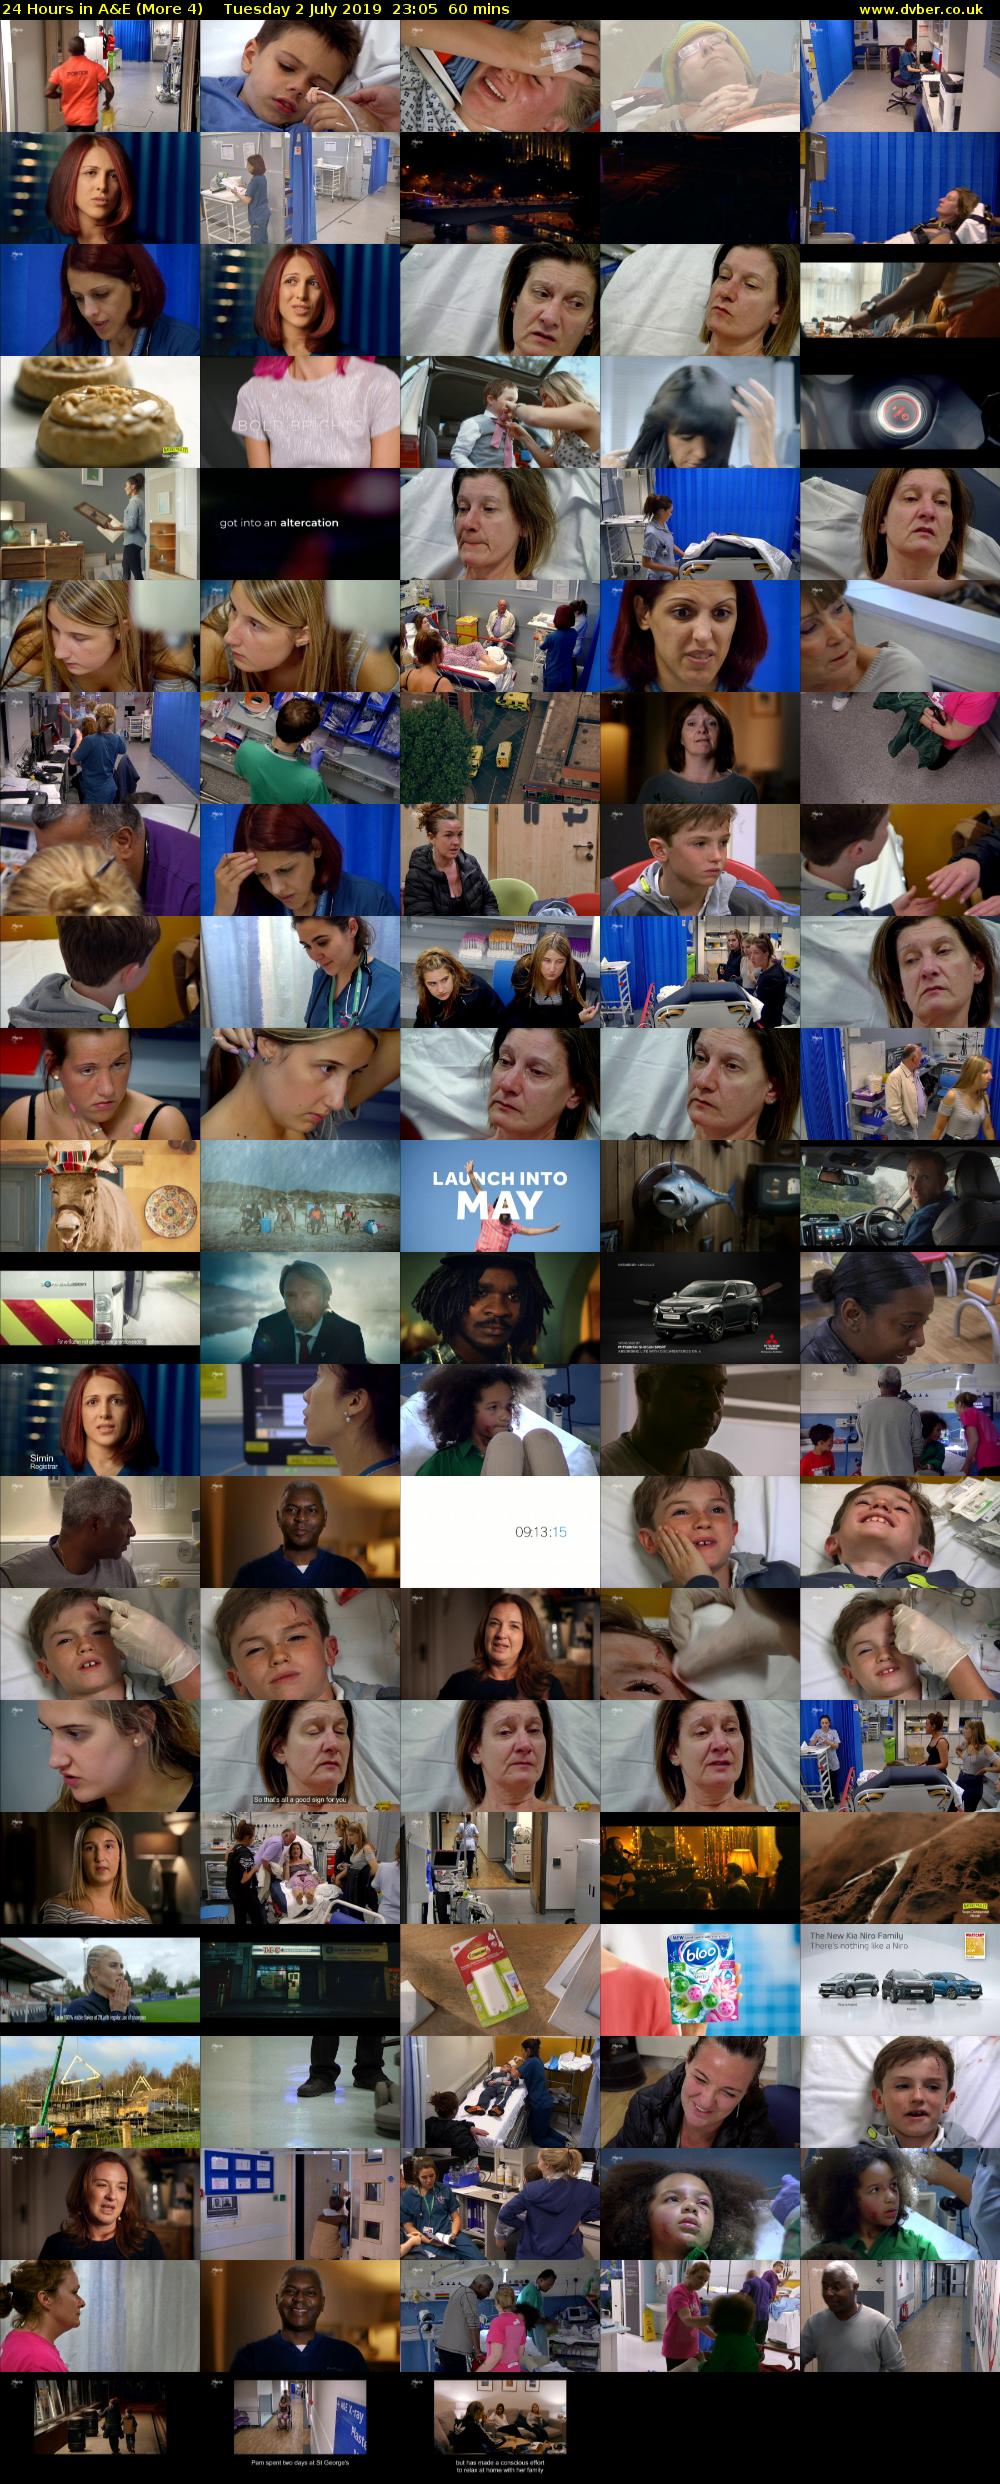 24 Hours in A&E (More 4) Tuesday 2 July 2019 23:05 - 00:05